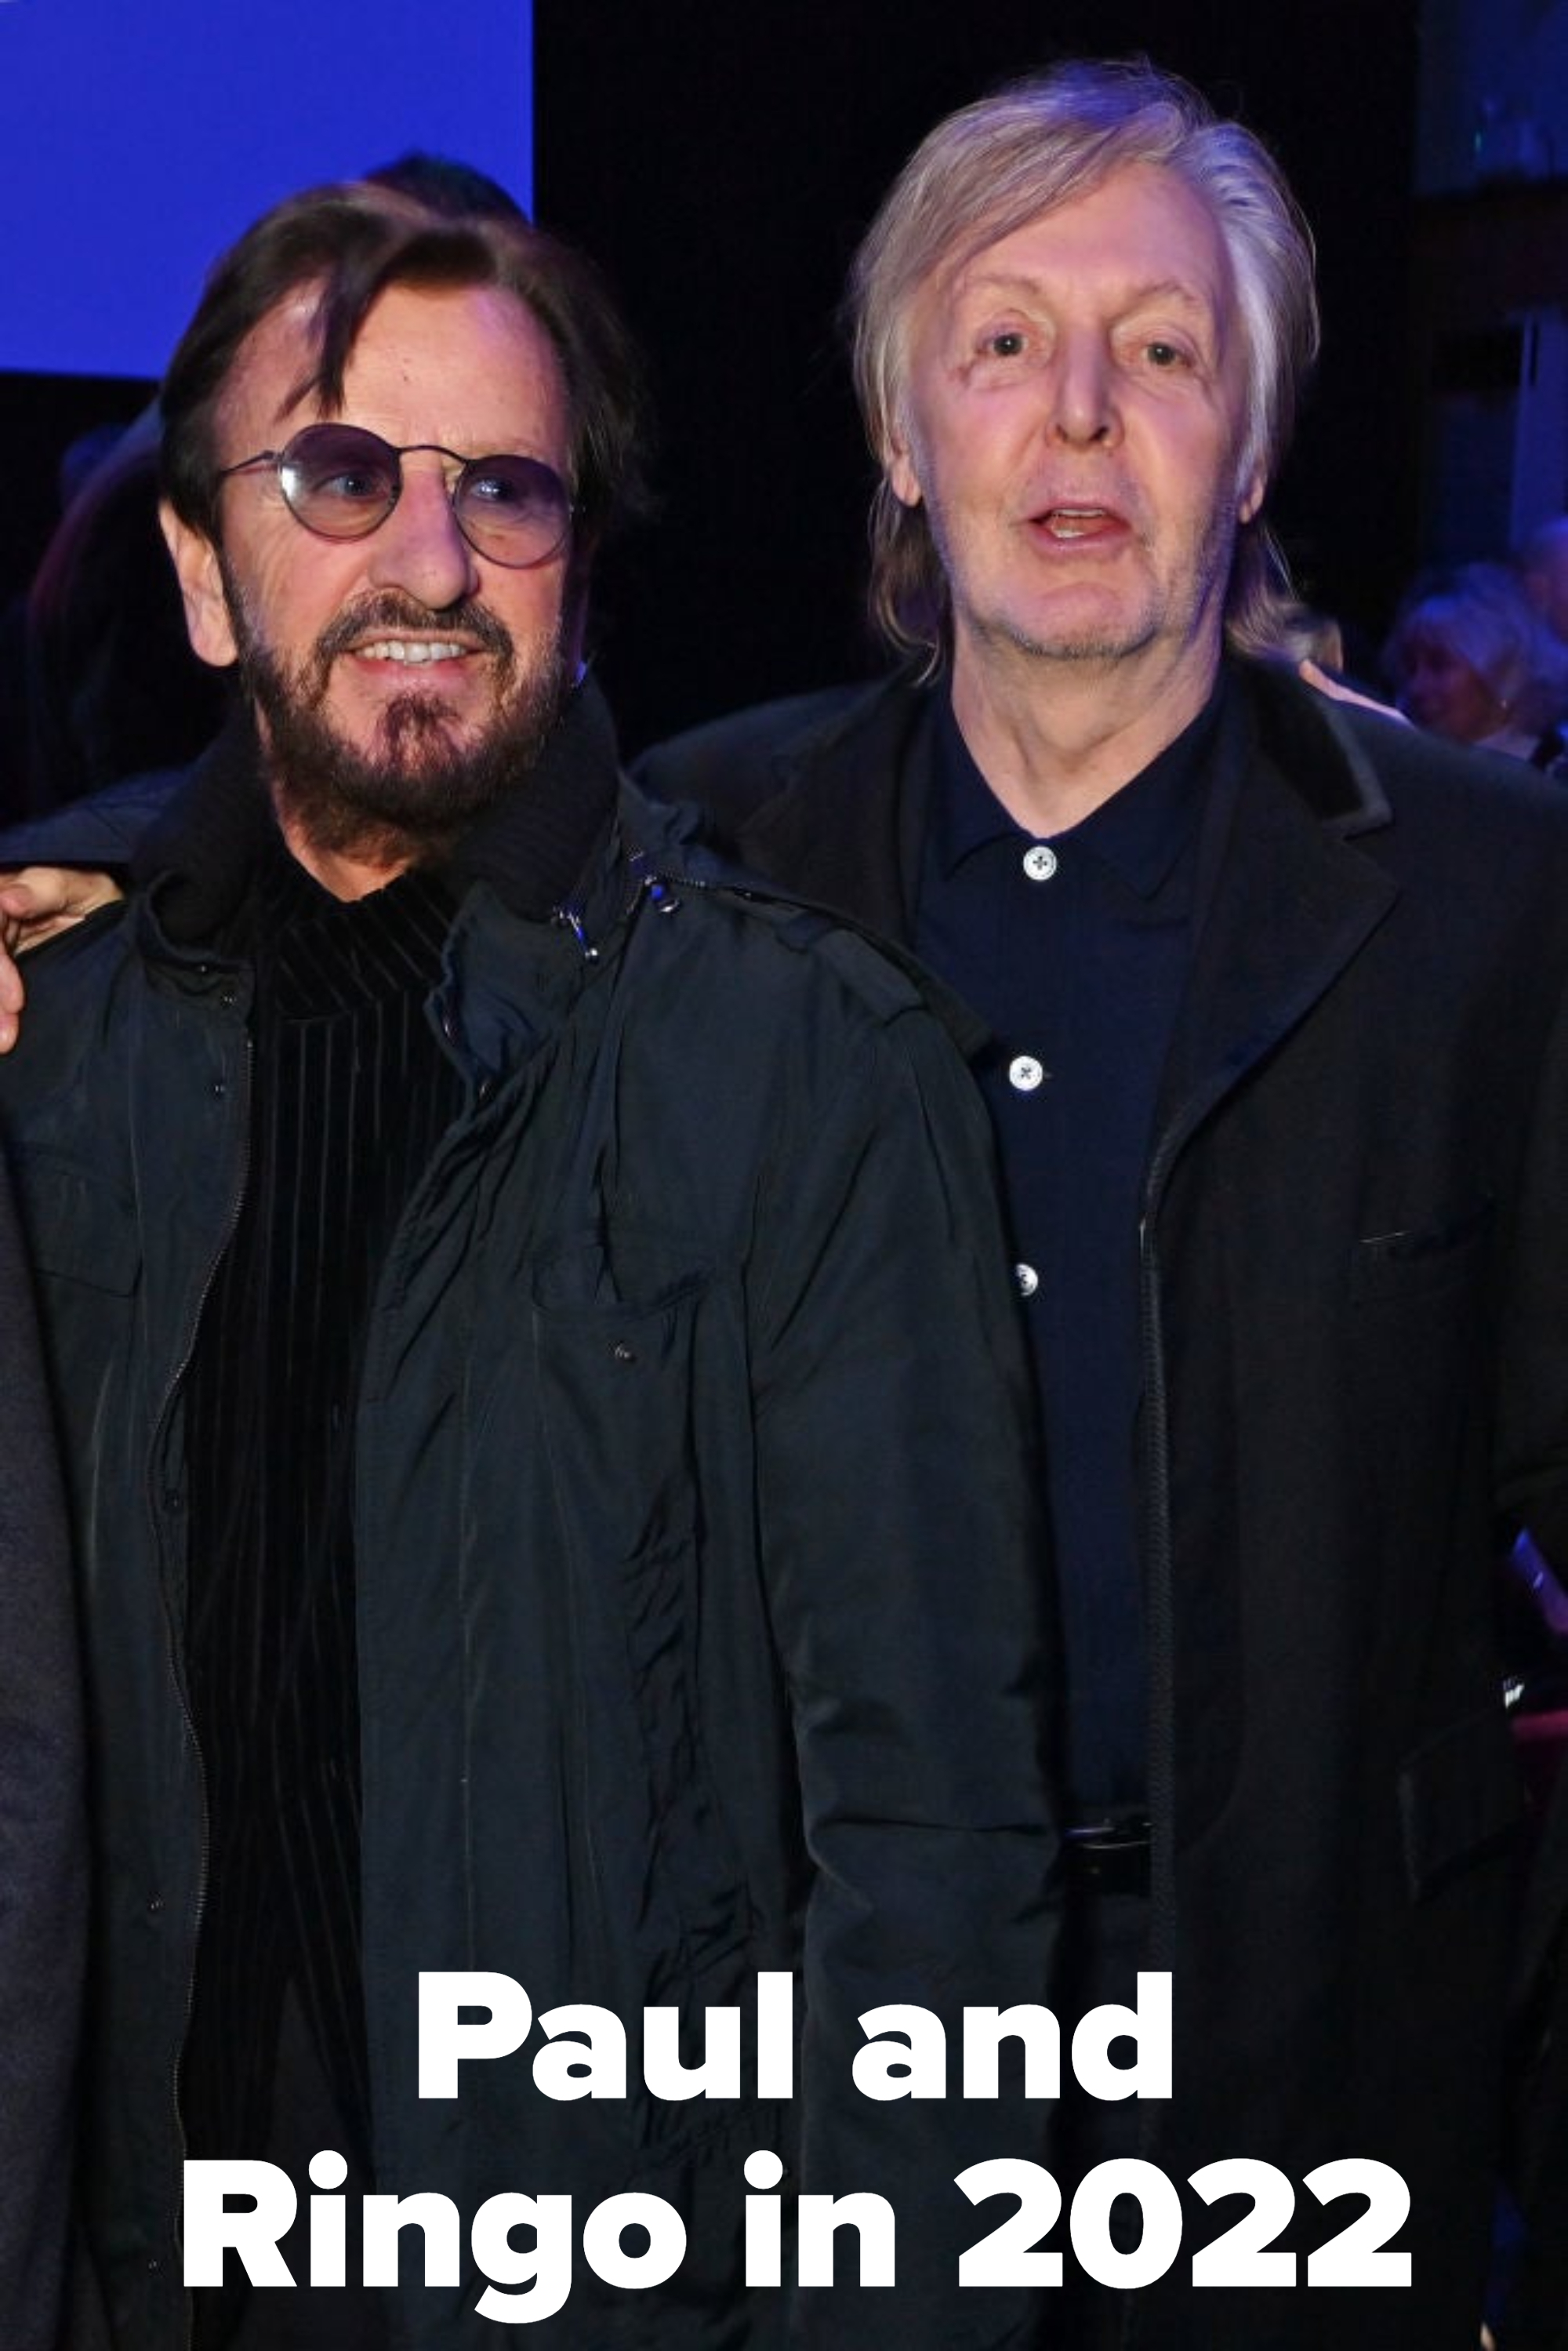 paul and ringo together in 2022